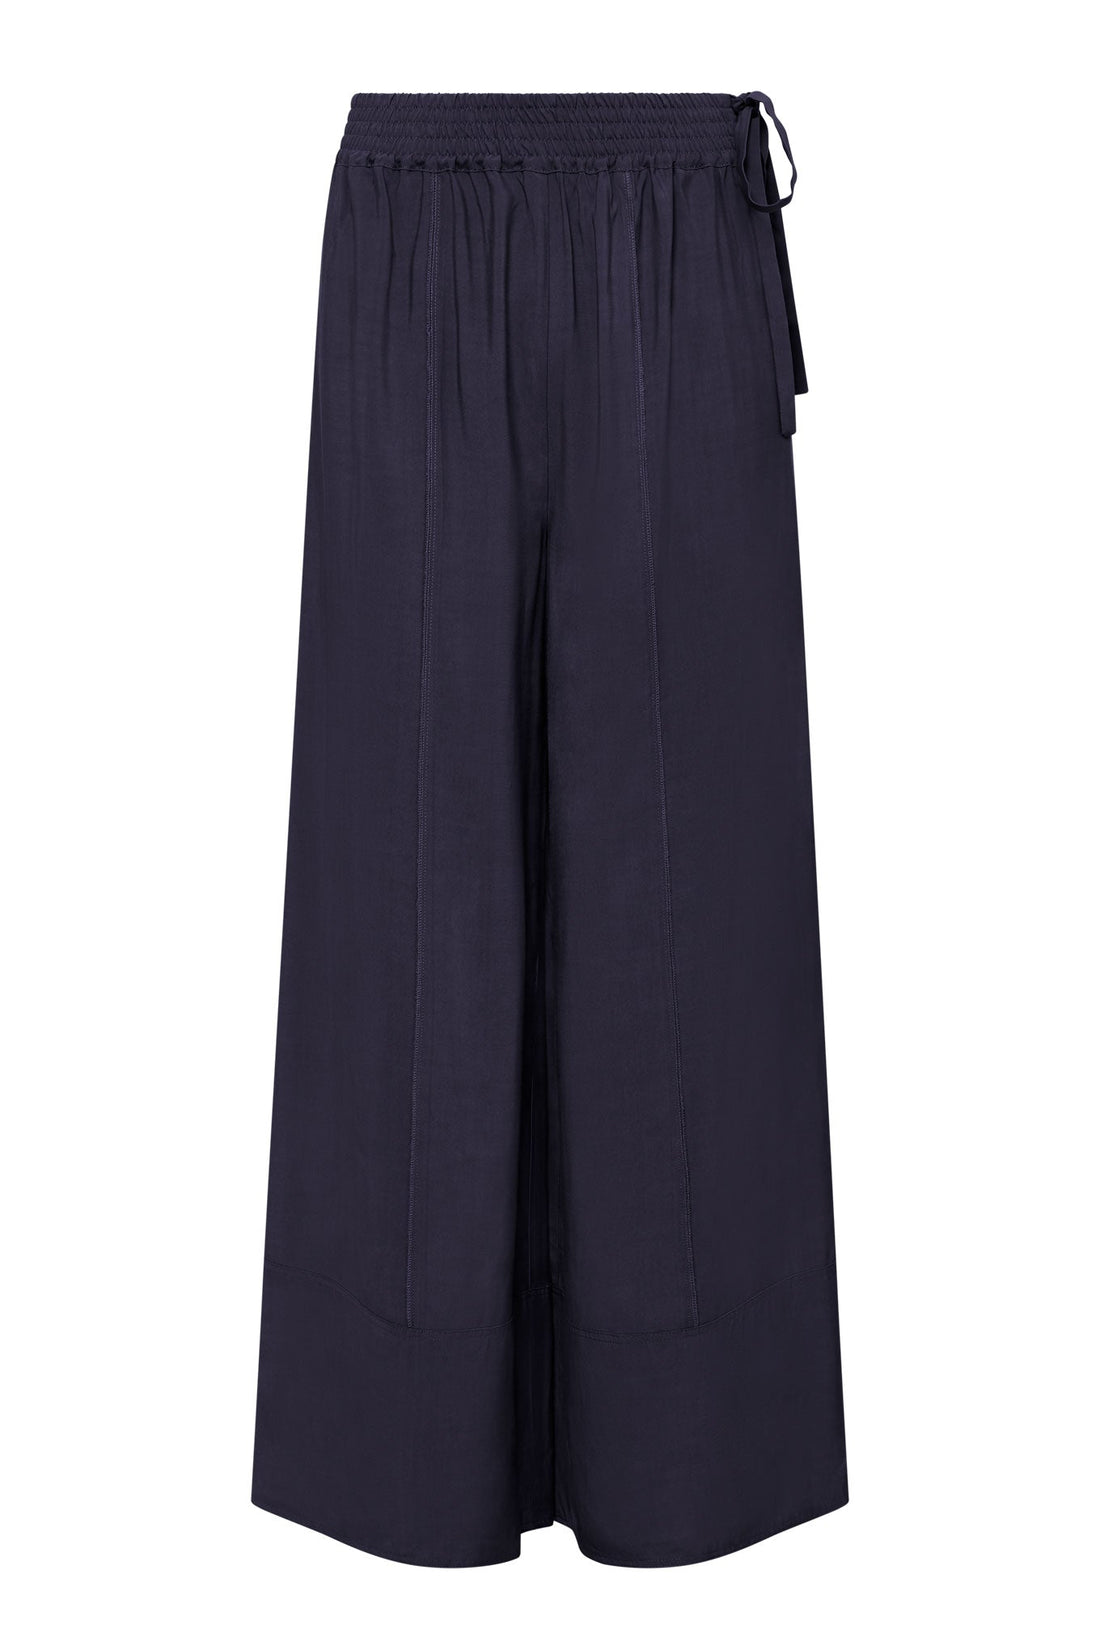 MARIE - Rayon Navy Trousers